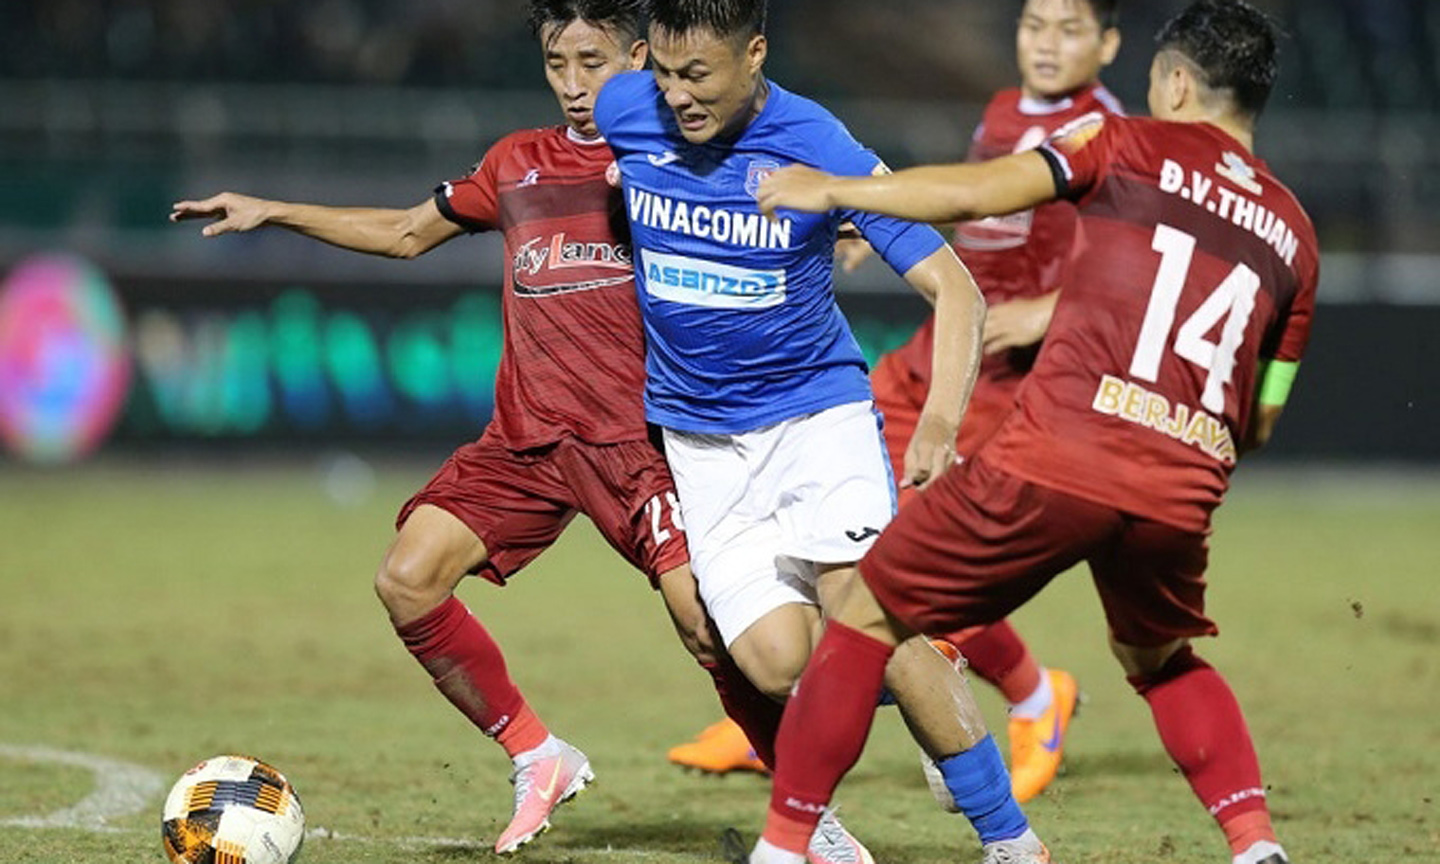 Quang Ninh Coal forward Mac Hong Quan (C) in action with HCM City players during their V.League match on August 17. (Photo: VPF)